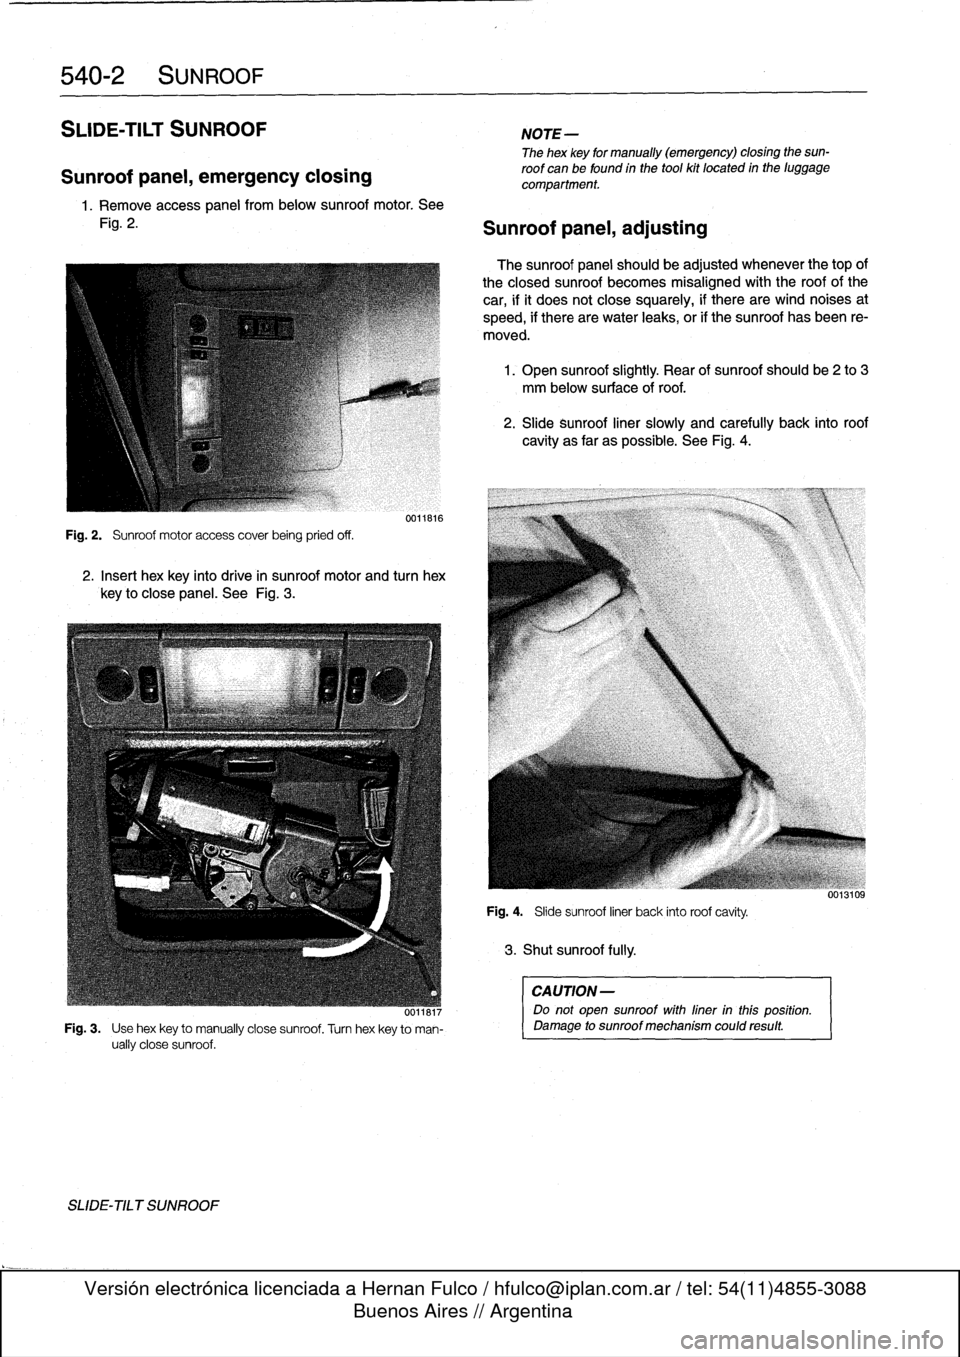 BMW 323i 1995 E36 Workshop Manual 
540-2
SUNROOF

SLIDE-TILT
SUNROOF

Sunroof
panel,
emergency
closing

1.
Remove
access
panel
frombelow
sunroof
motor
.
See

Fig
.
2
.

Fig
.
2
.

	

Sunroof
motor
access
coverbeing
pried
off
.

001181